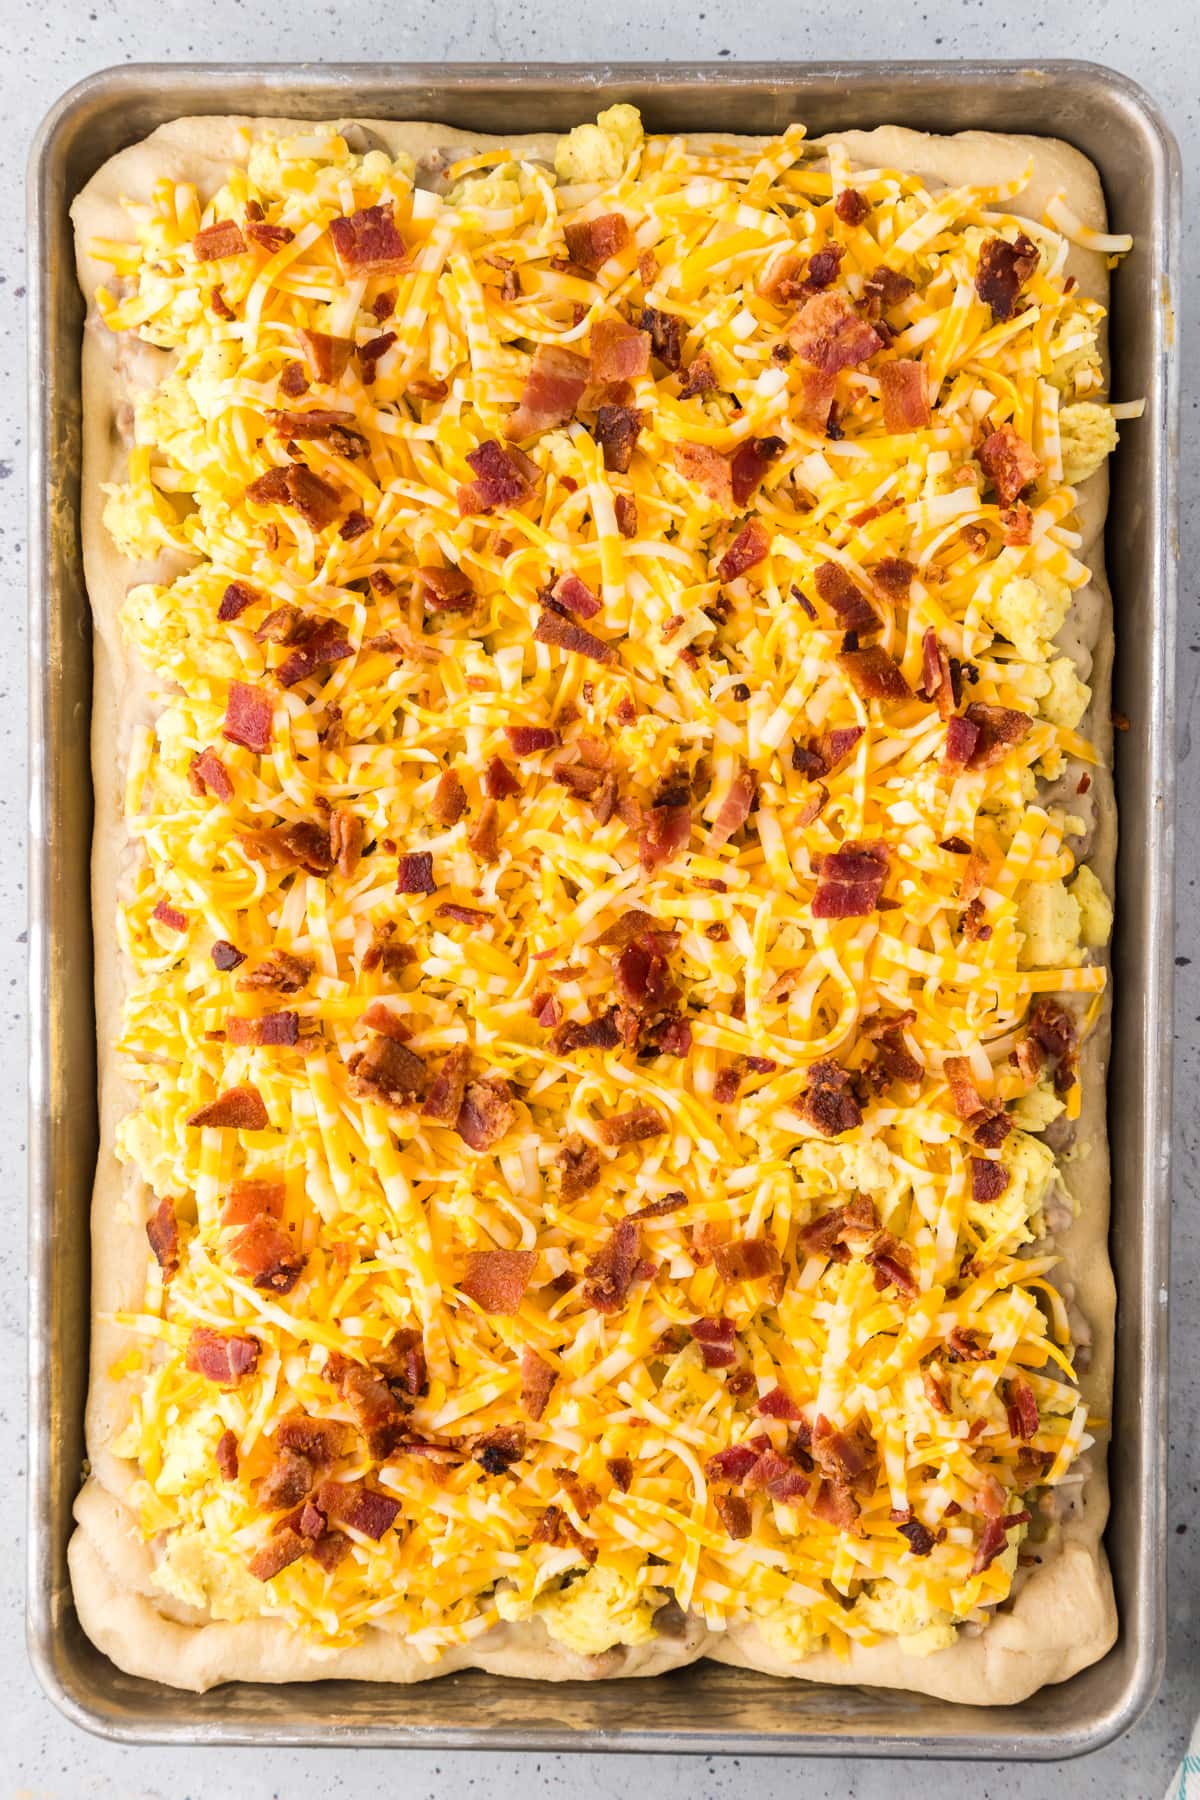 Crispy bacon and shredded cheese topping a breakfast pizza.